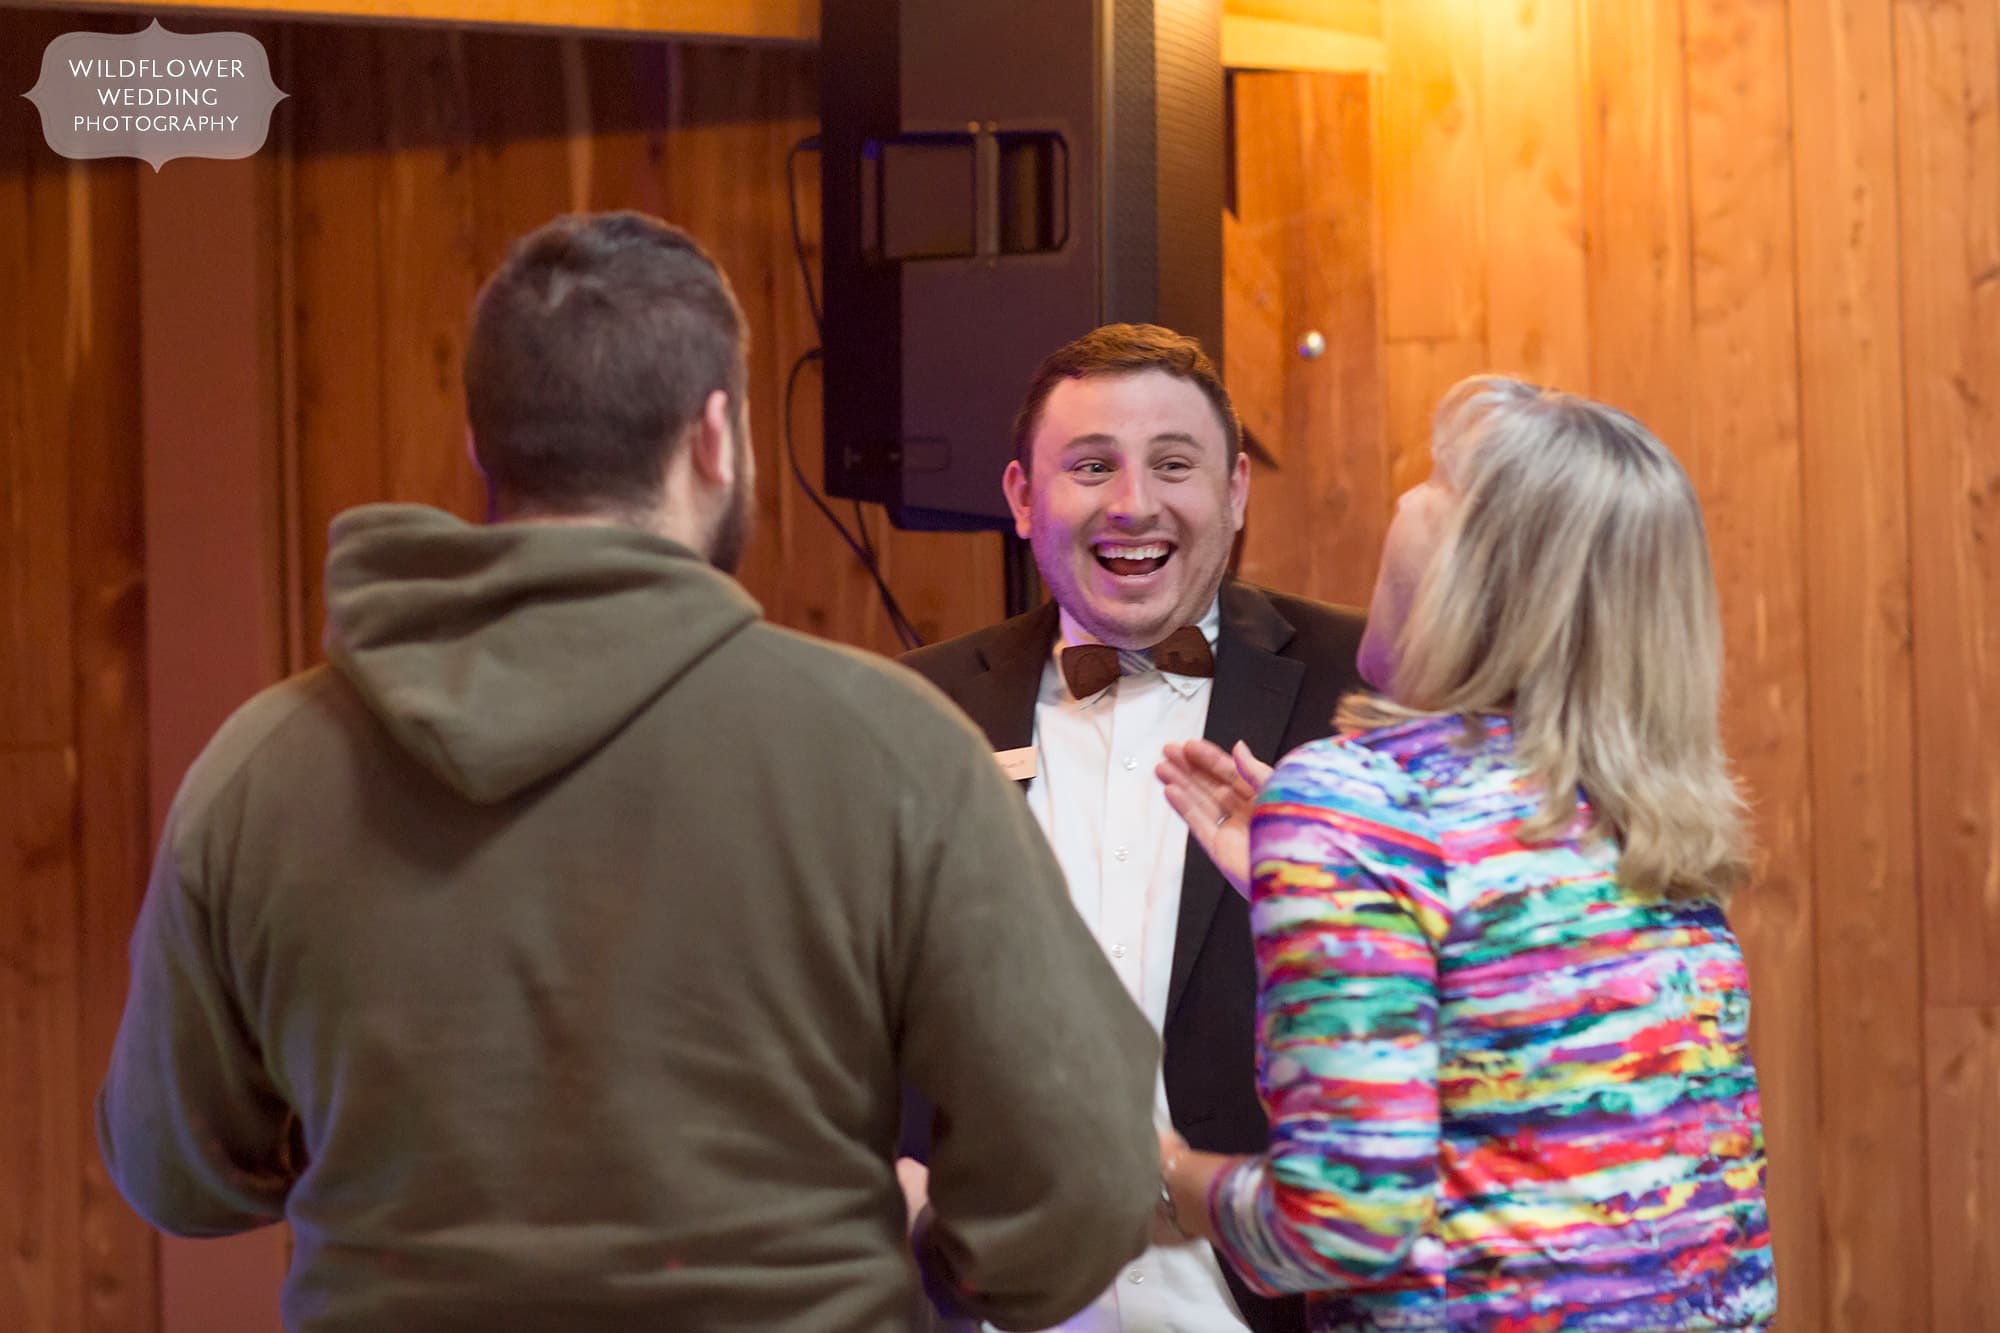 Nathan Pierce of Complete DJ service talks with a couple at the Little Piney Lodge wedding venue.